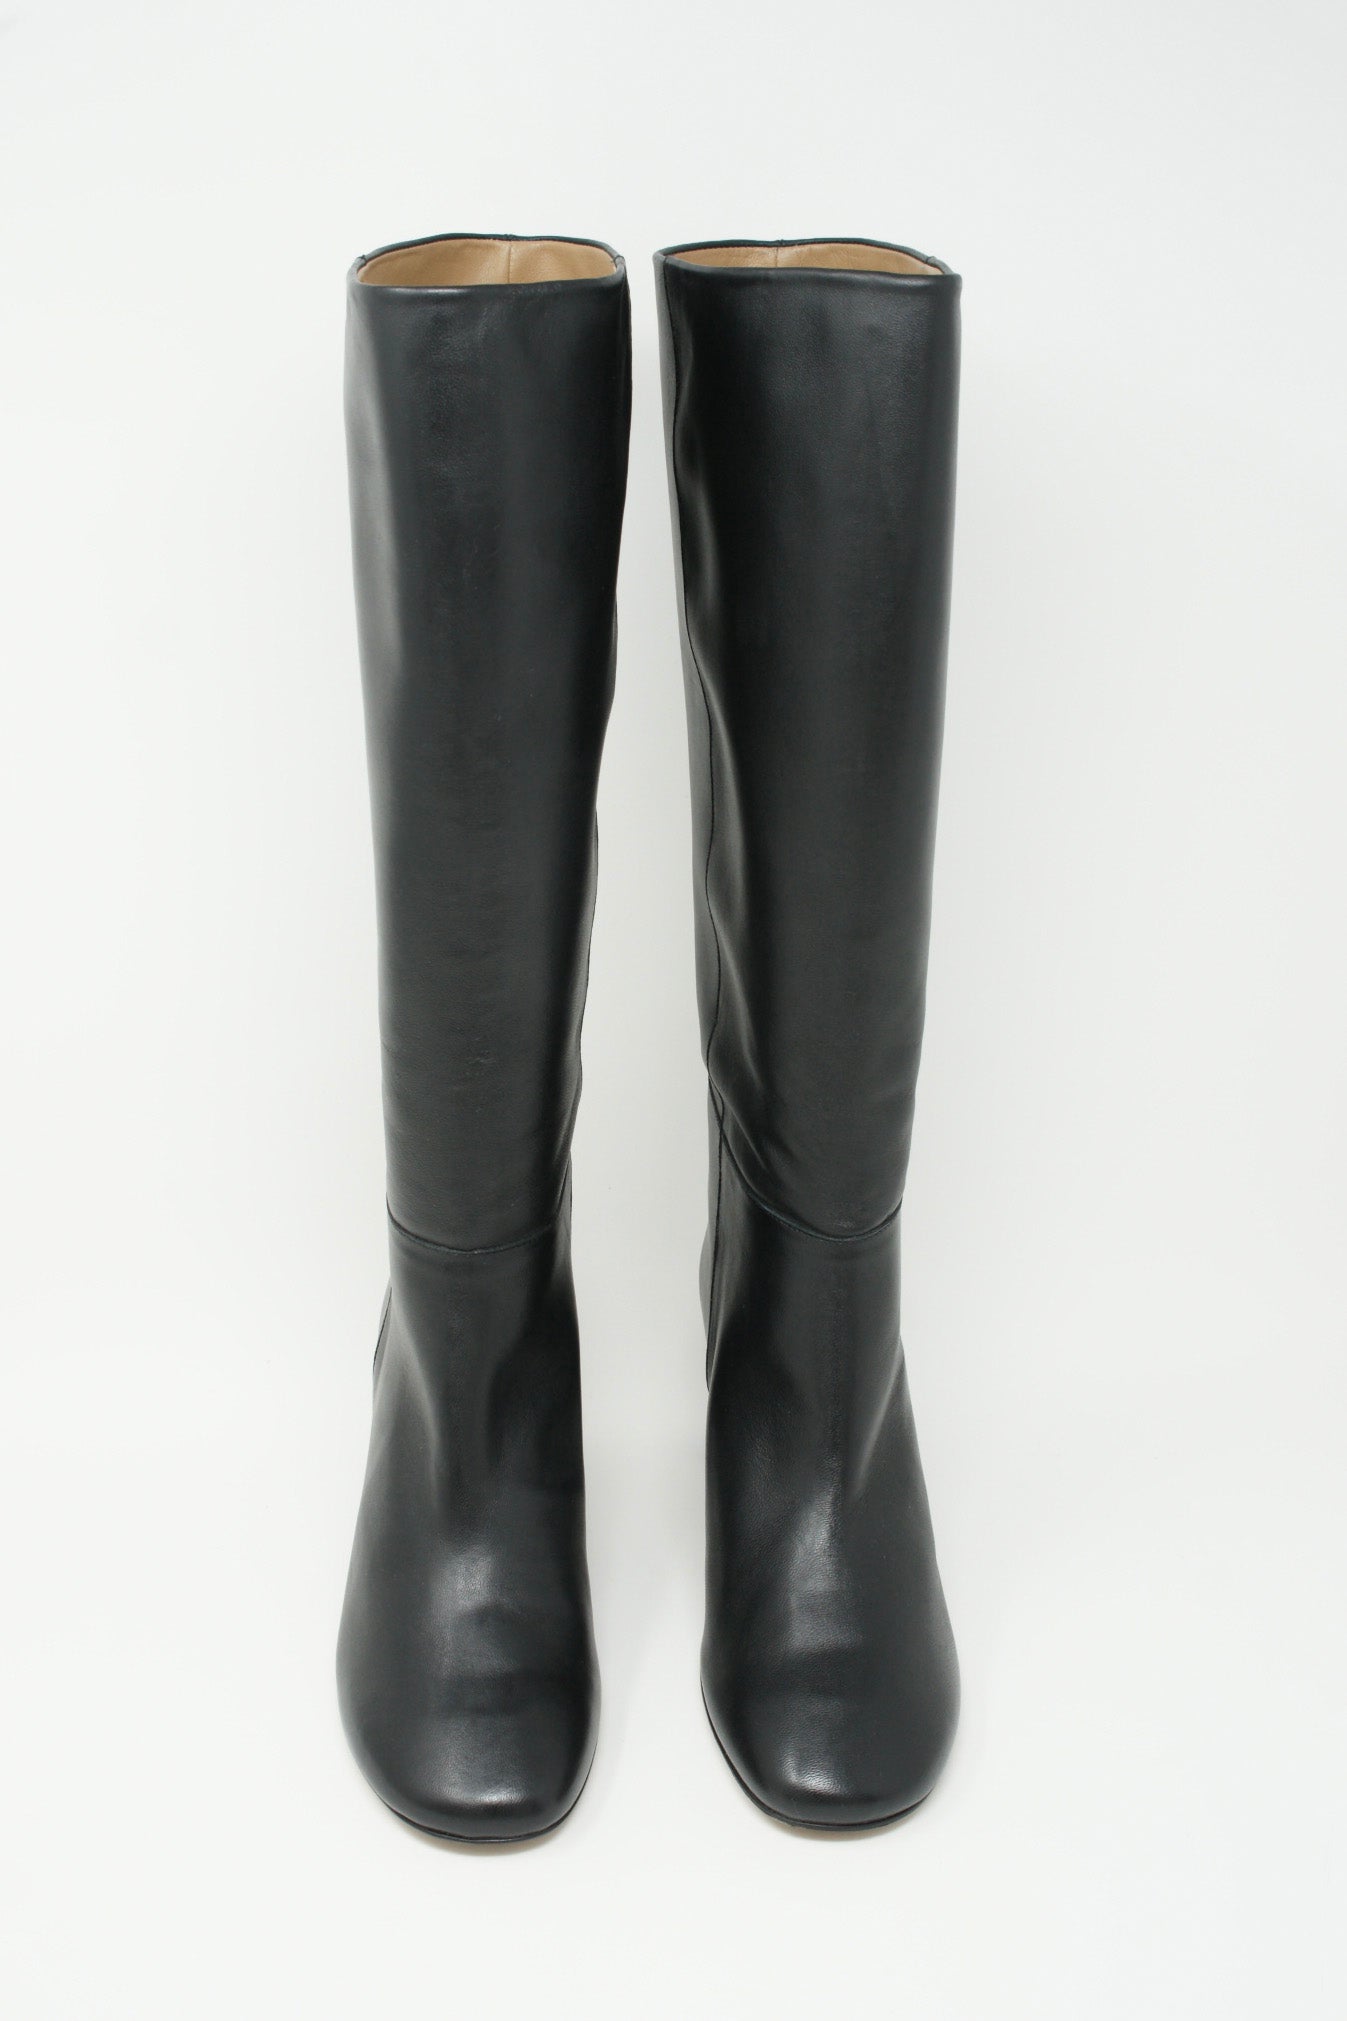 A pair of LOQ Donna Black boots on a white background.